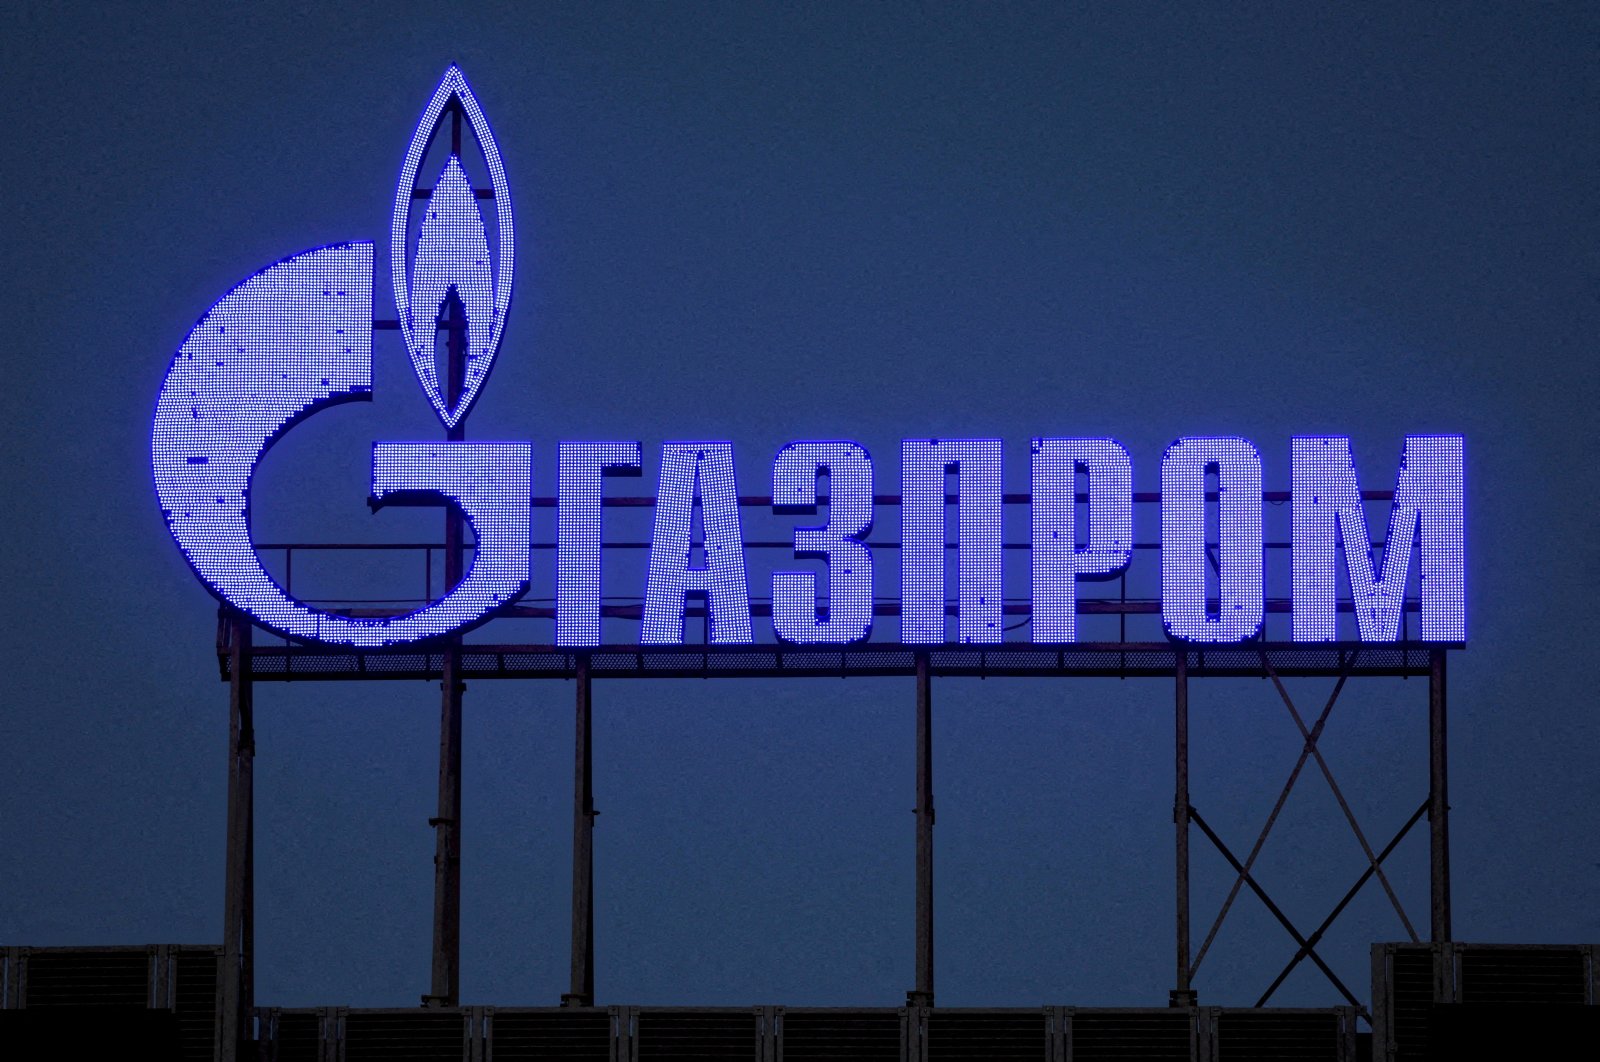 The logo of Gazprom is seen on the facade of a business center in St, Petersburg, Russia, March 31, 2022. (Reuters Photo)